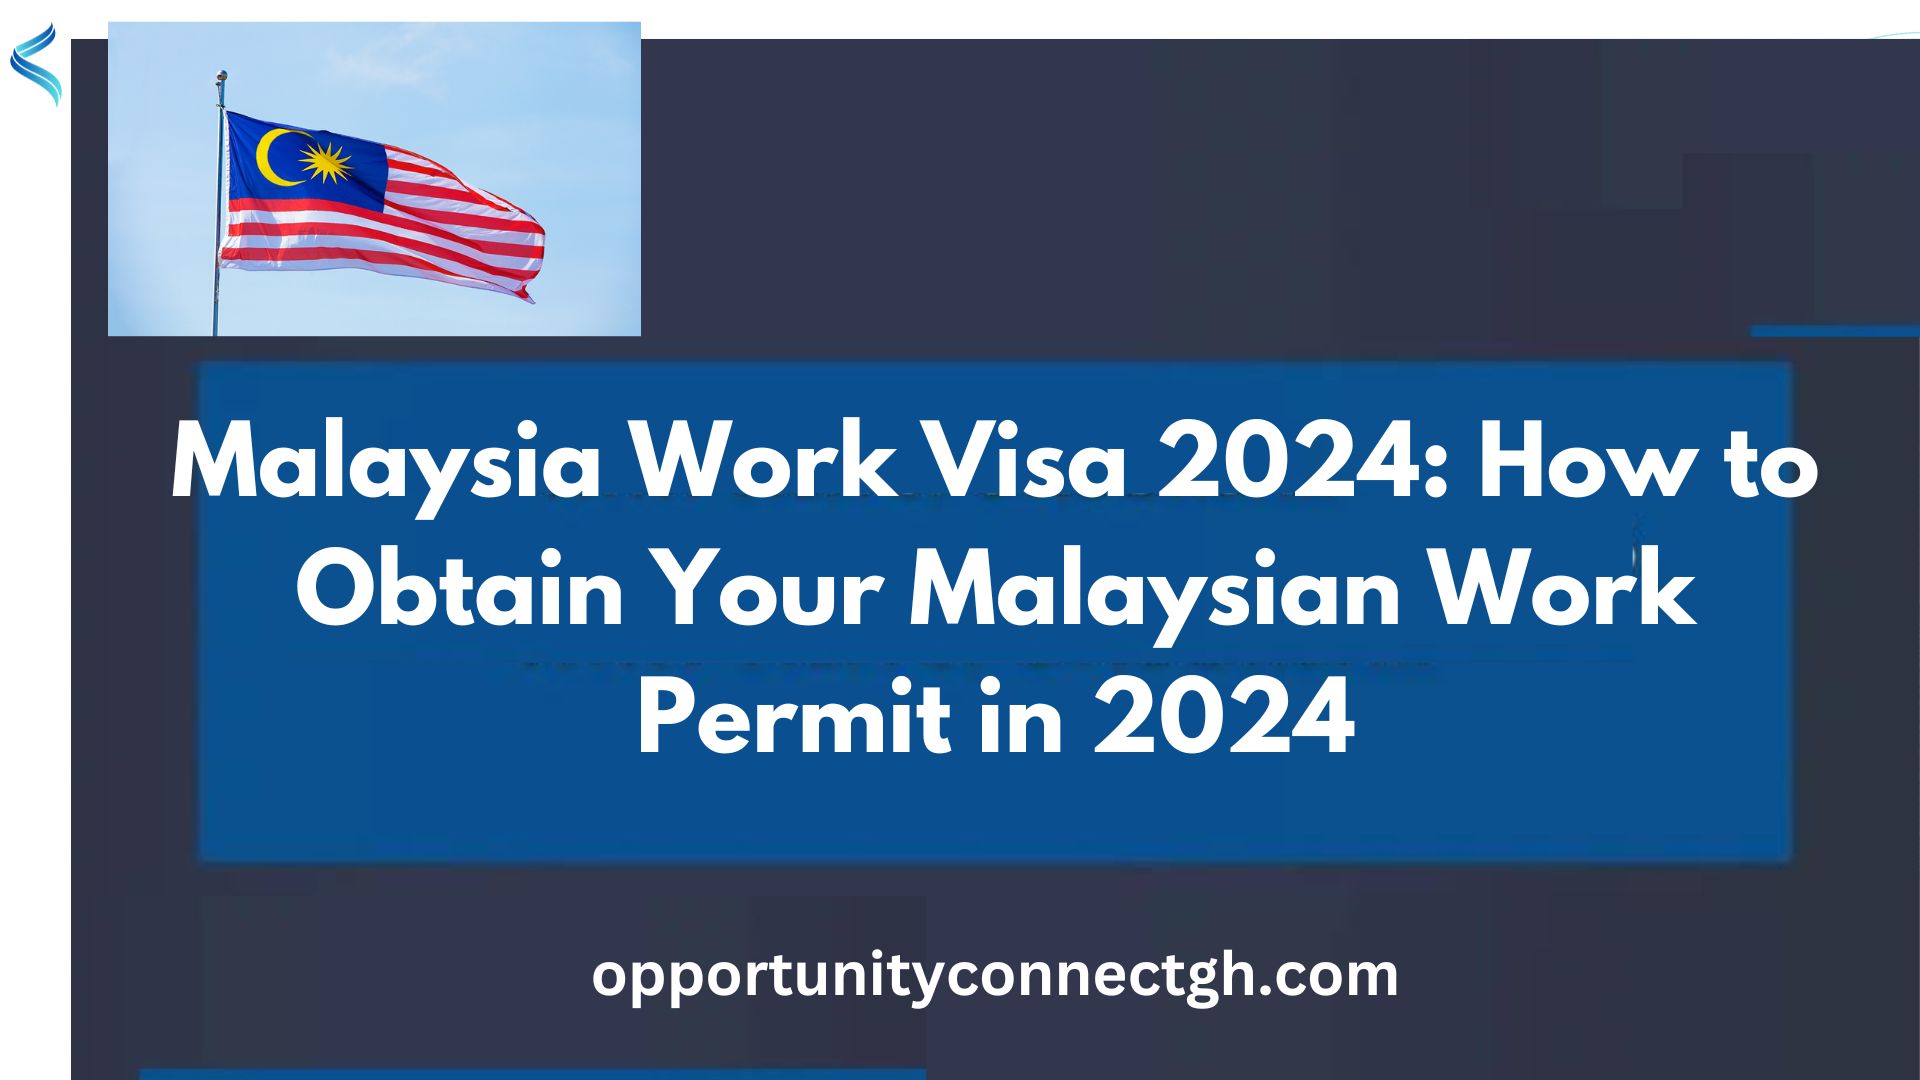 Malaysia Work Visa 2024 How to Obtain Your Malaysian Work Permit in